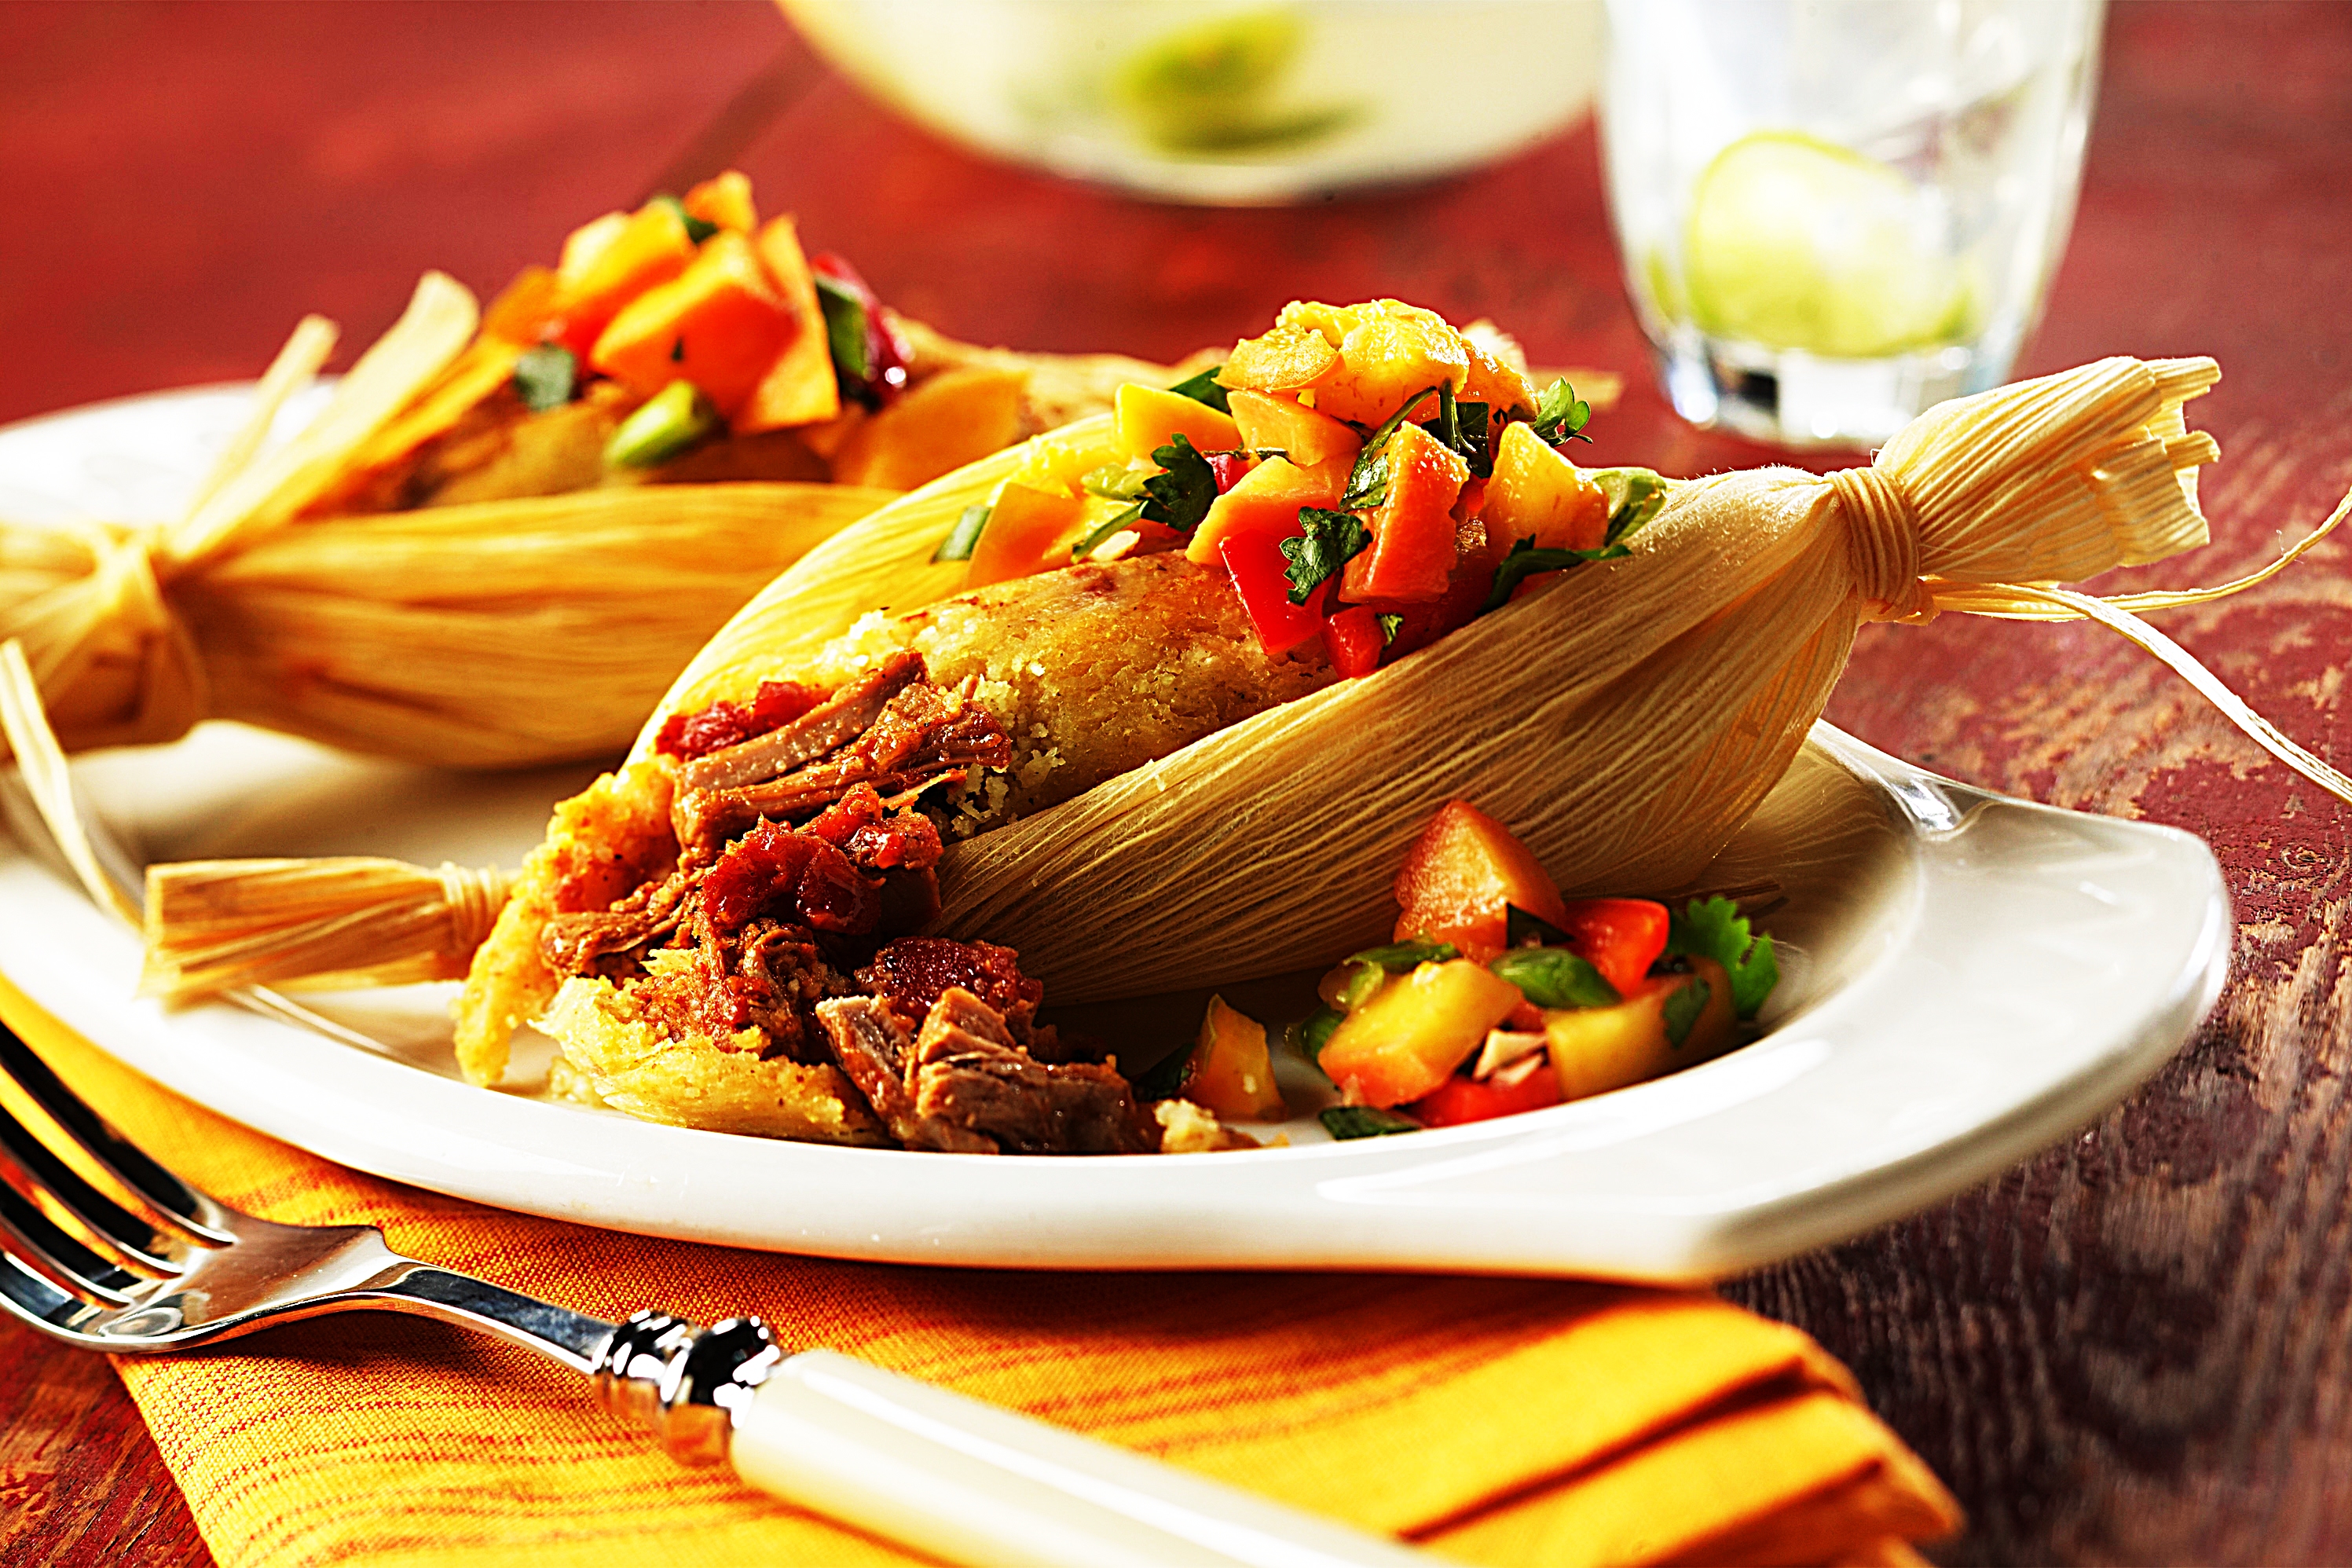 Stupid-Easy Recipe for Tamale with Spanish Braised Pork Shank and White Peach Salsa (#1 Top-Rated)